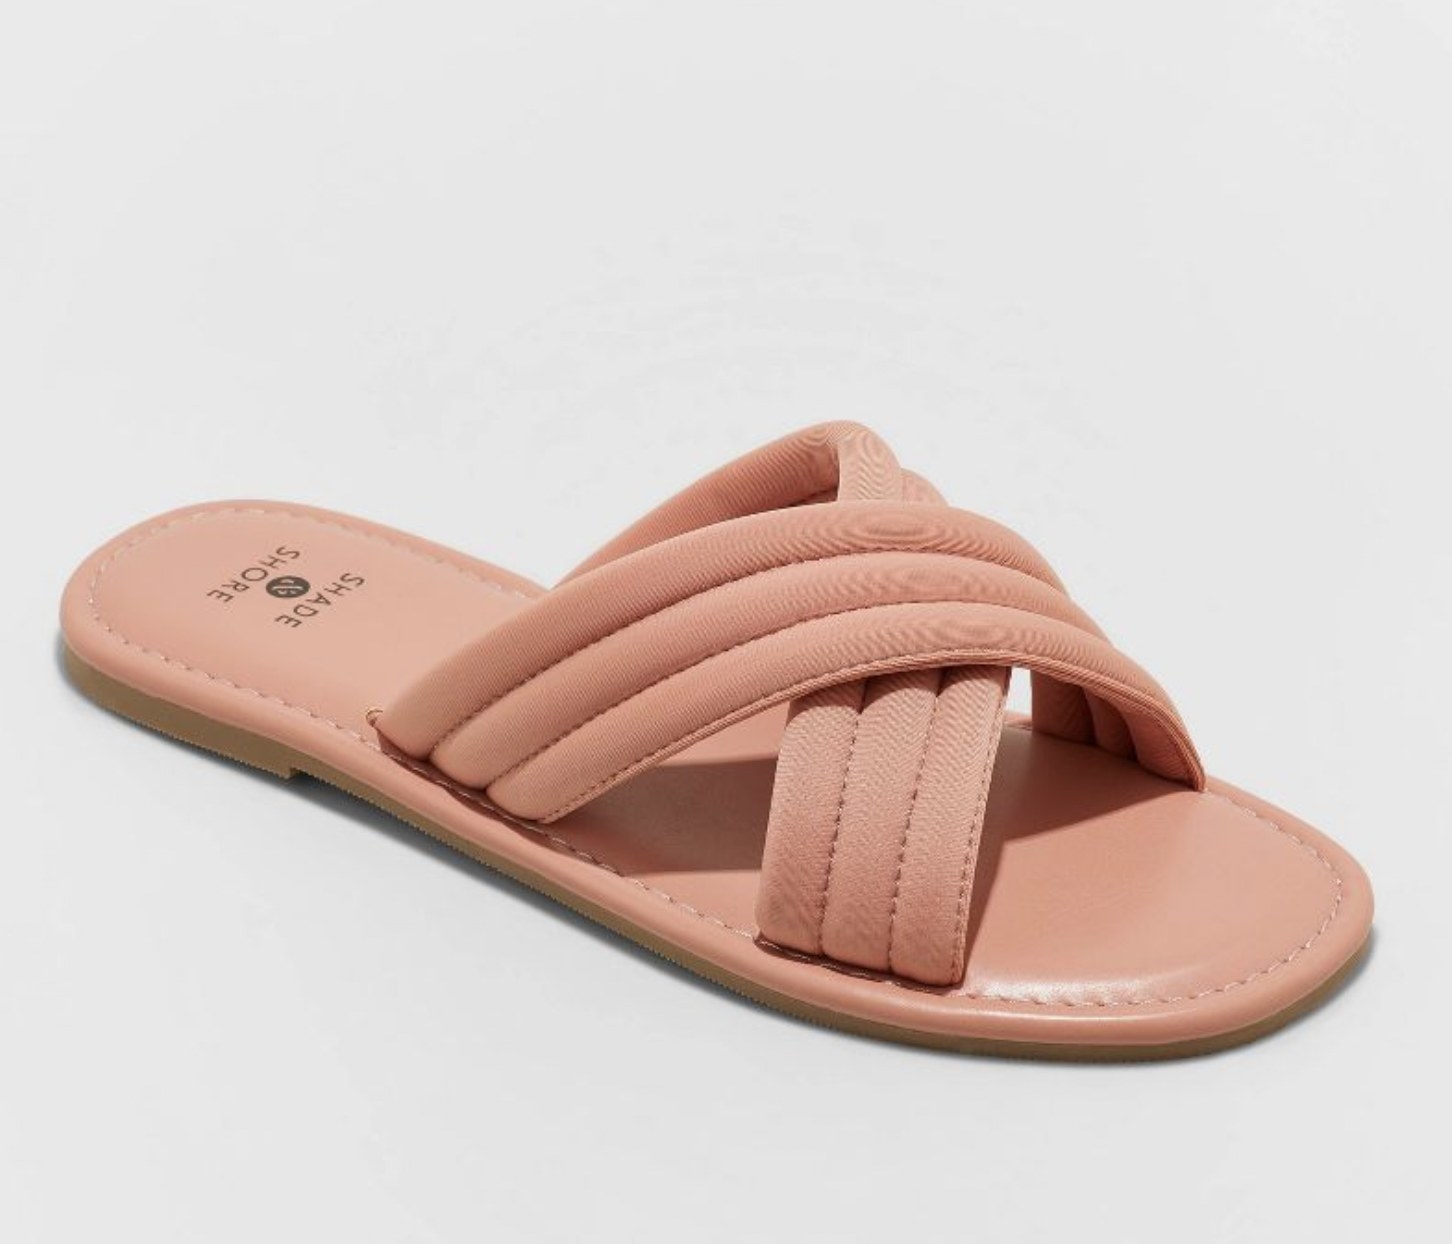 the sandal in rose pink